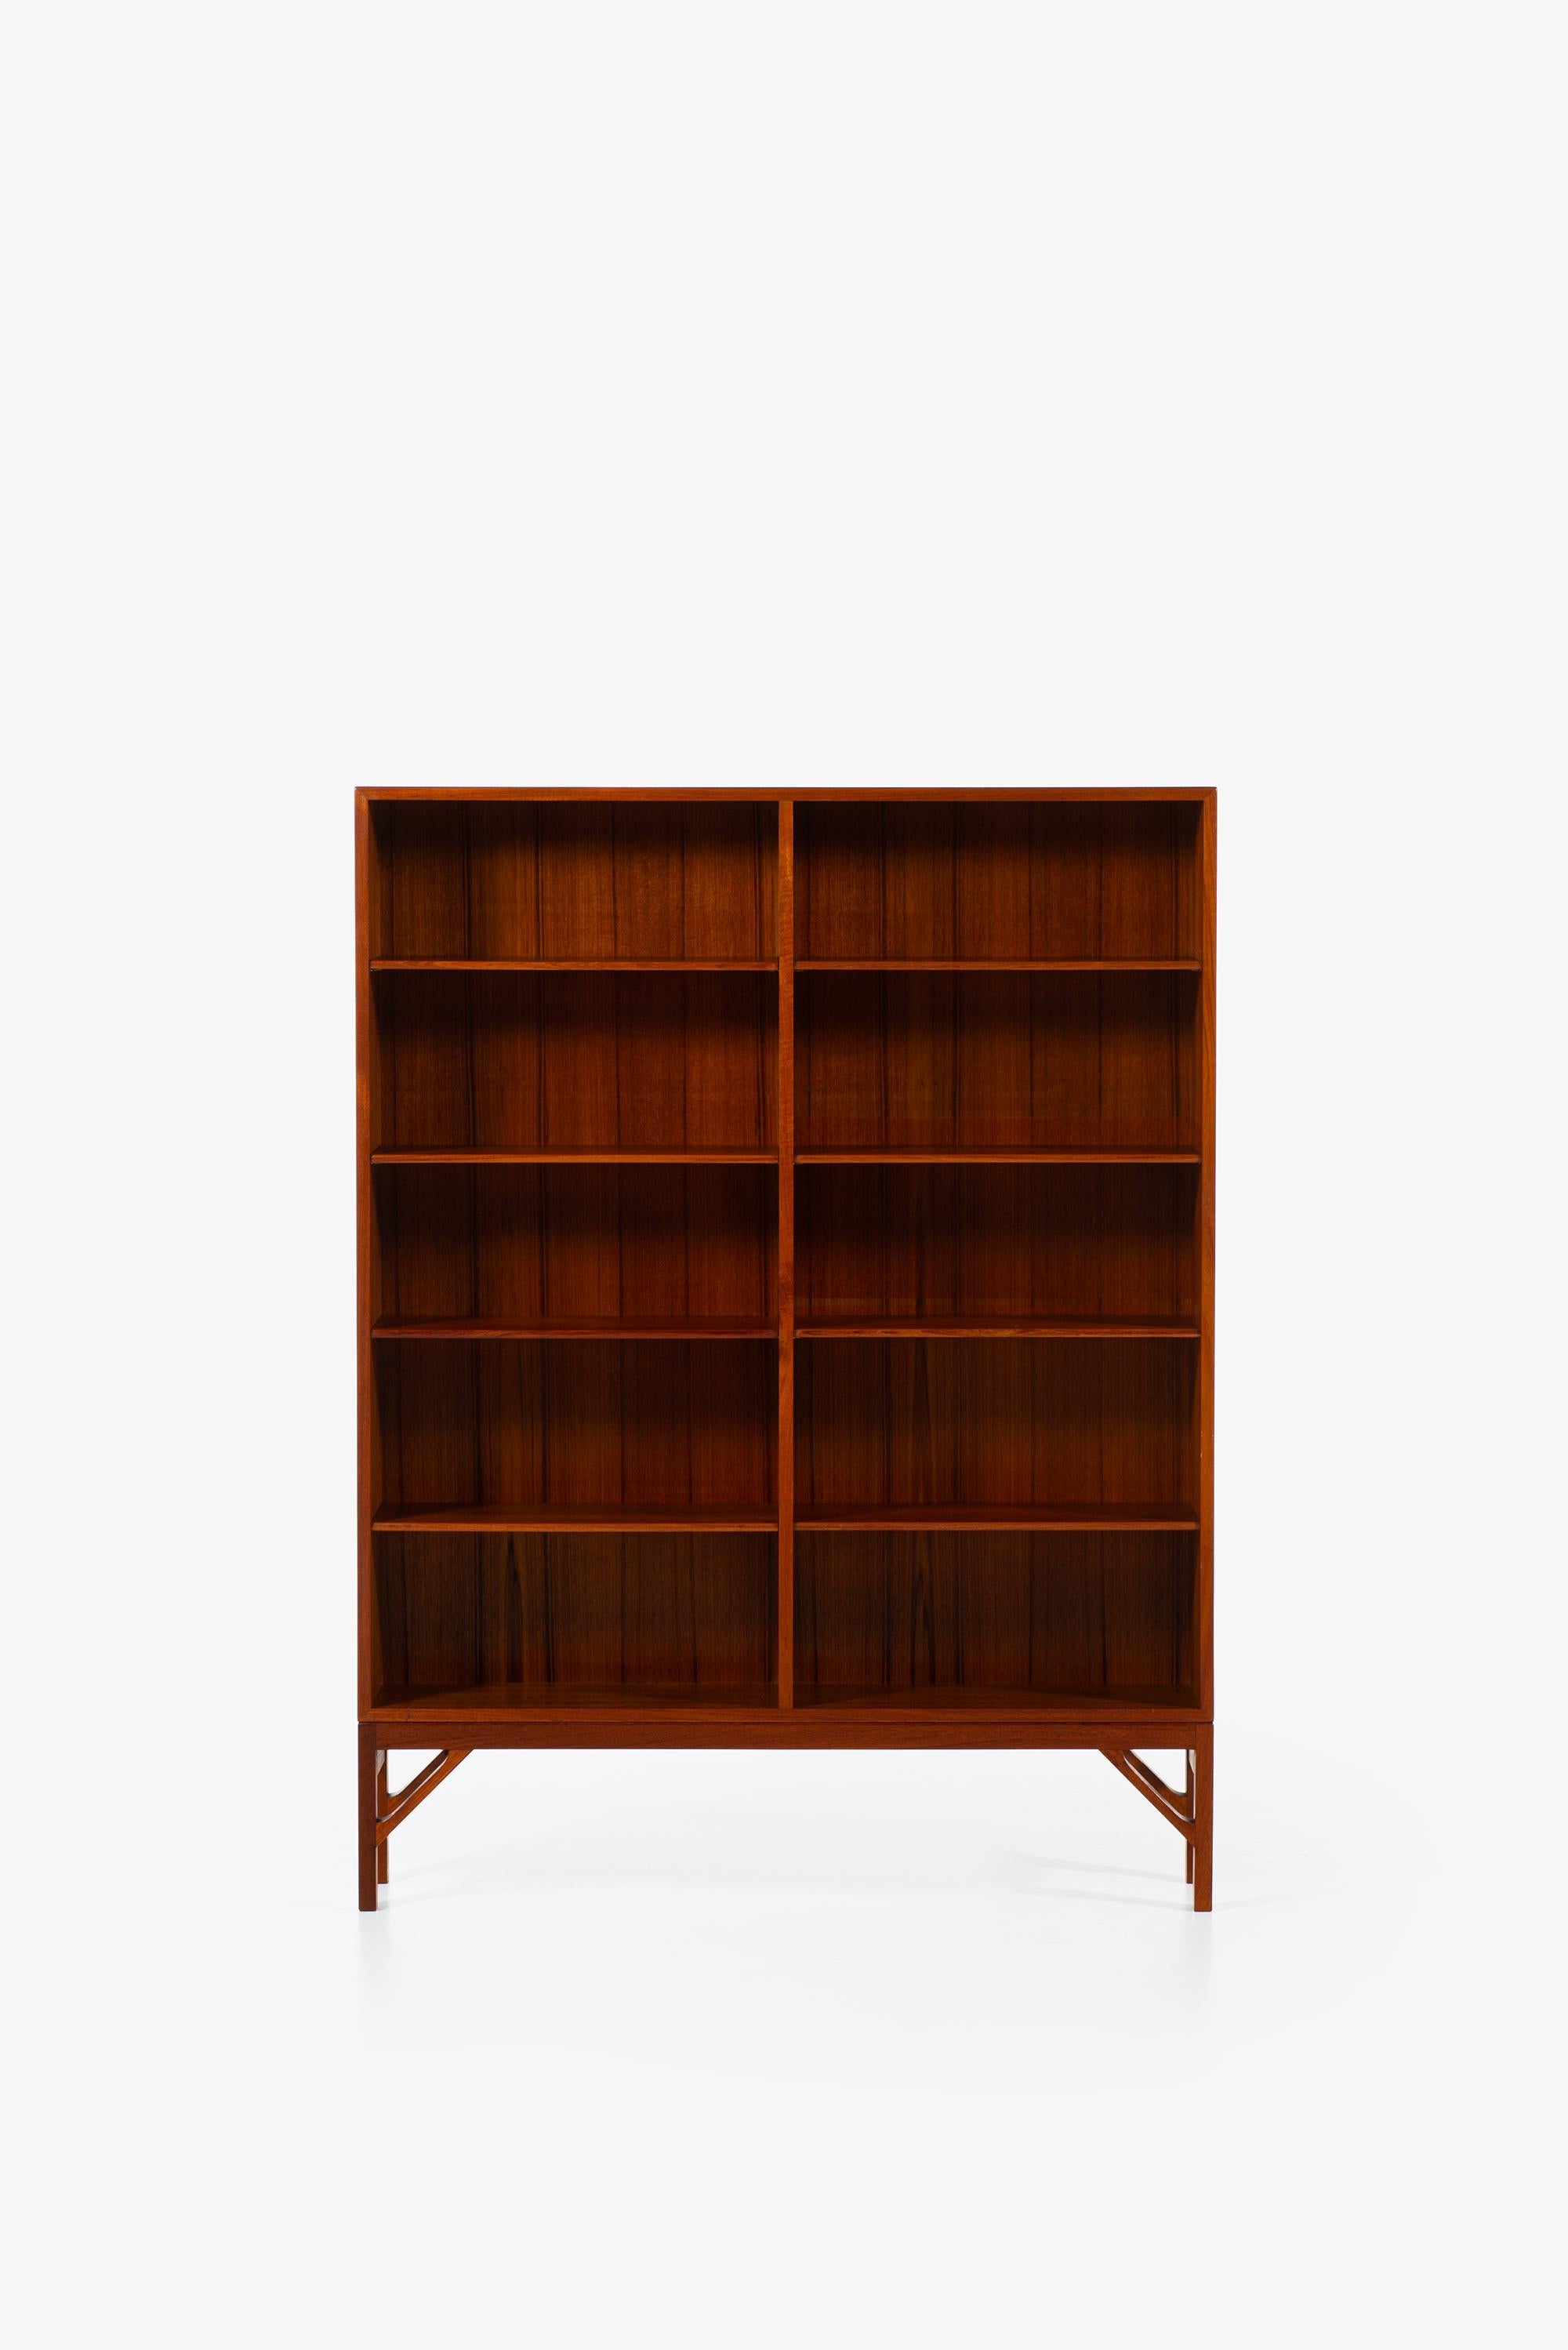 A pair of bookcases designed by Børge Mogensen. Produced by C. M. Madsen in Denmark.